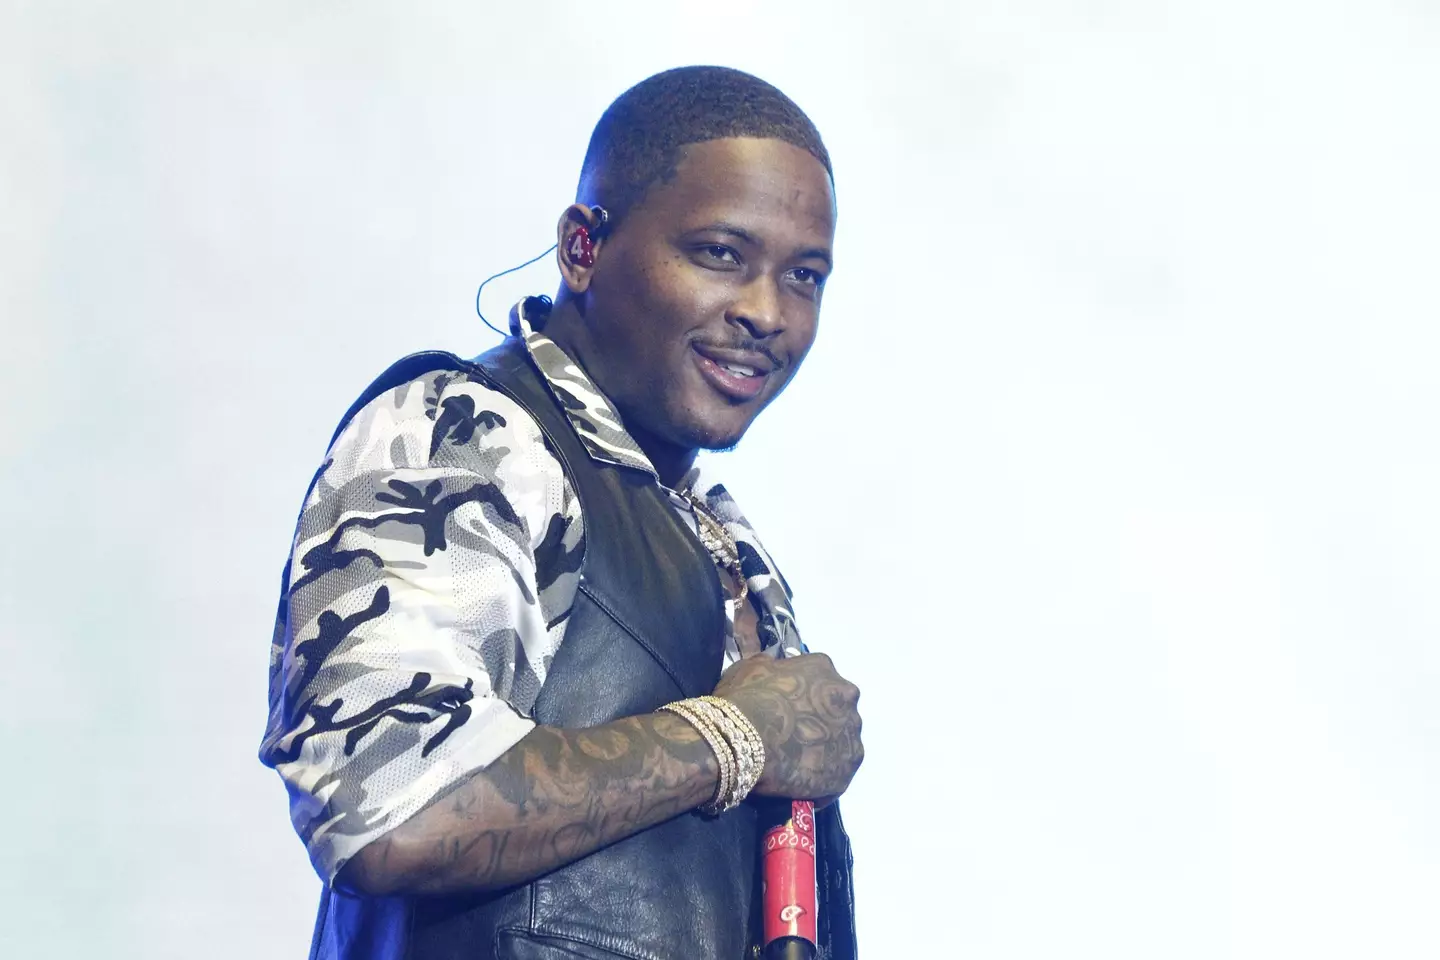 YG is charging fans $1,000 for a VIP experience.